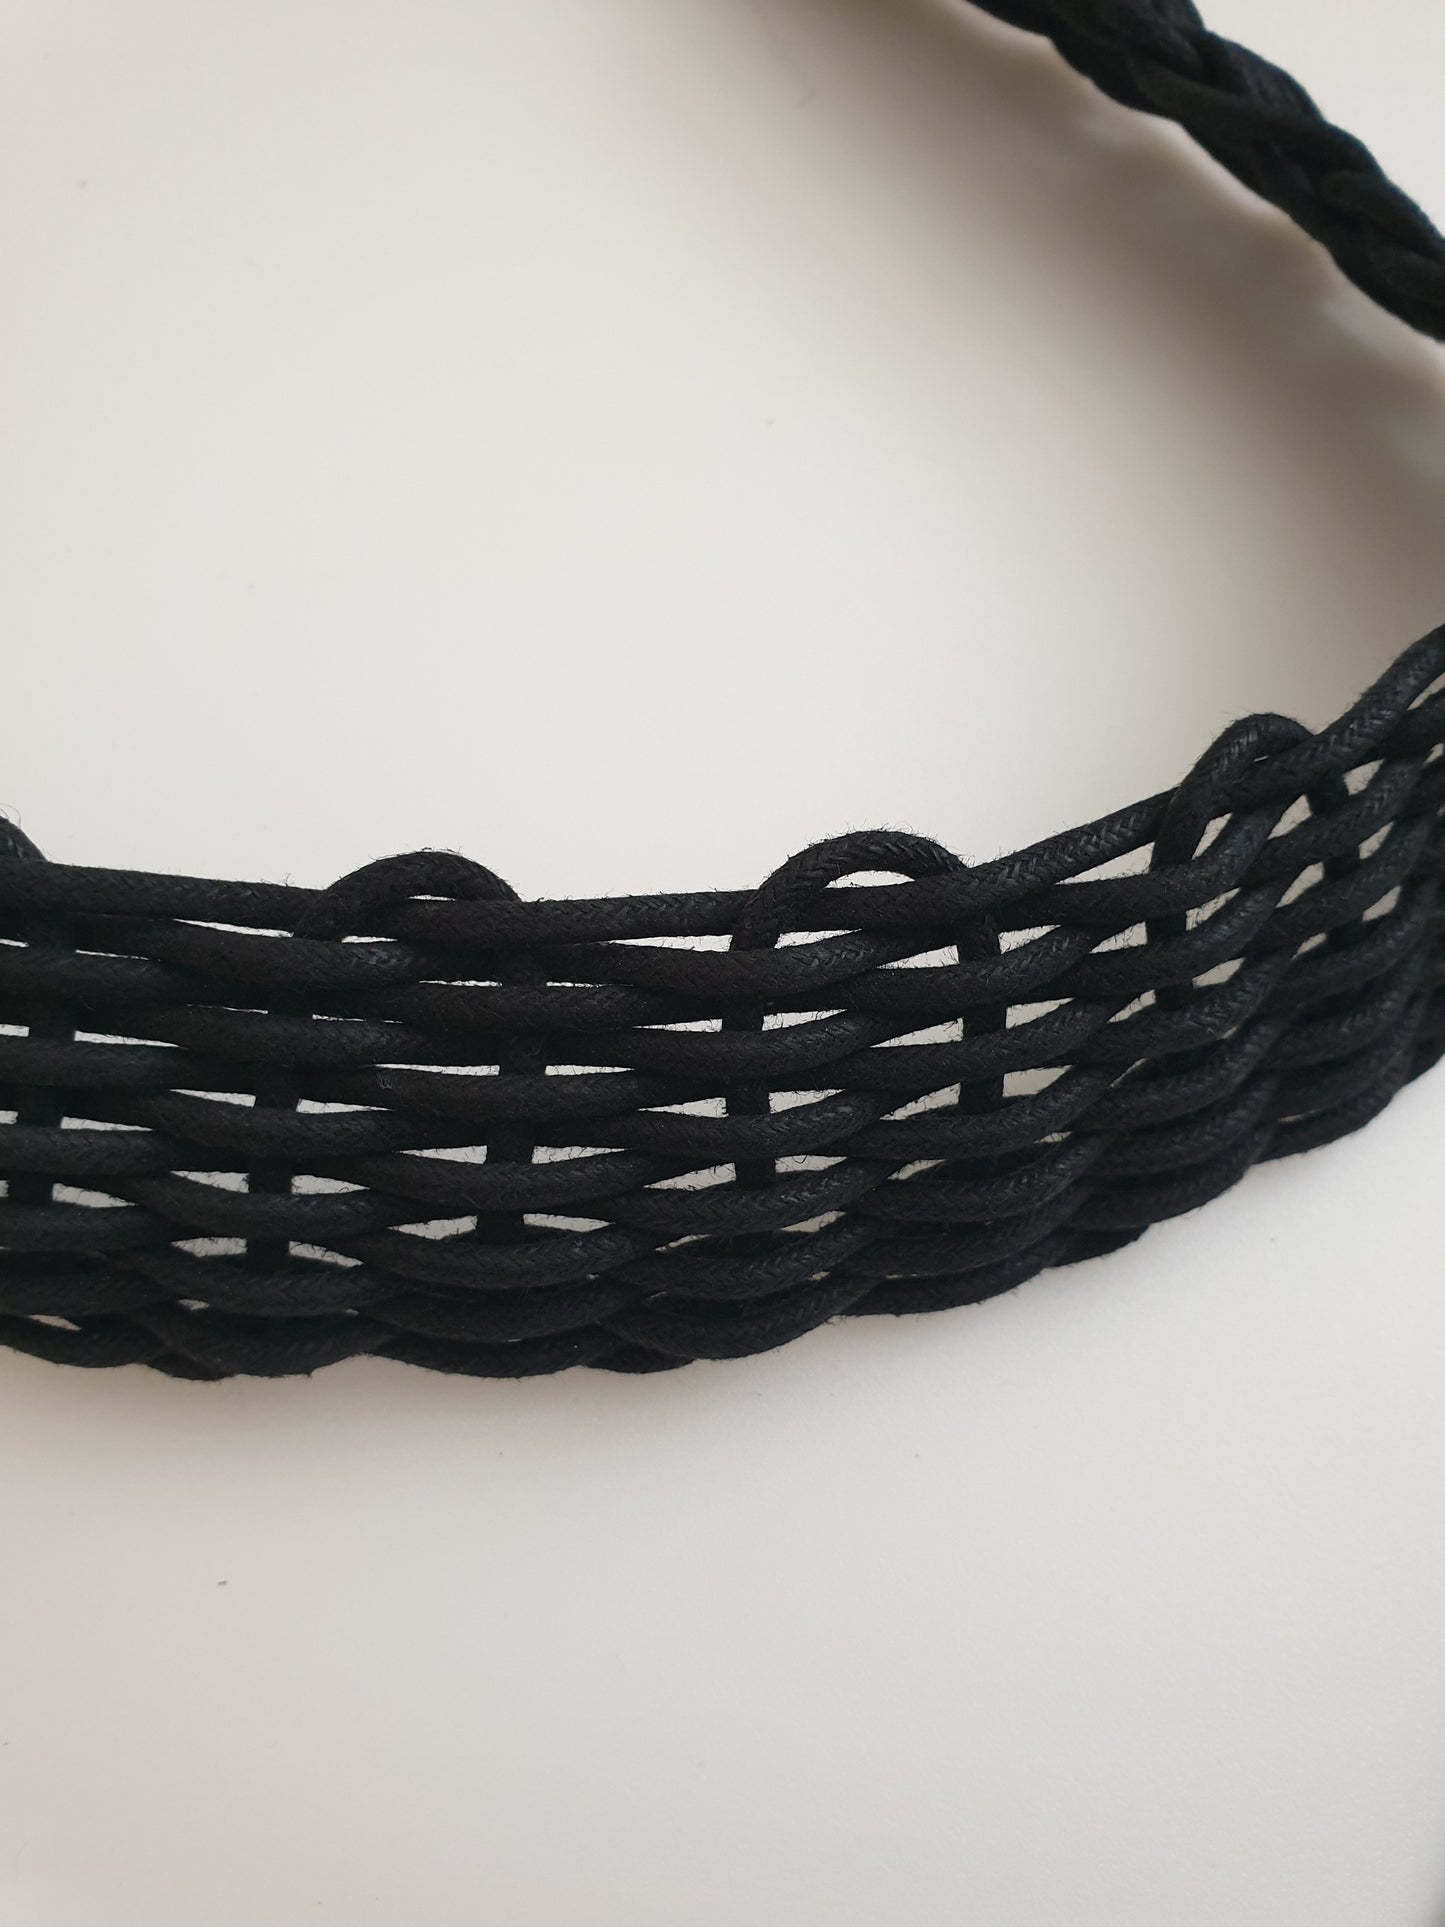 Leather and straw choker necklace